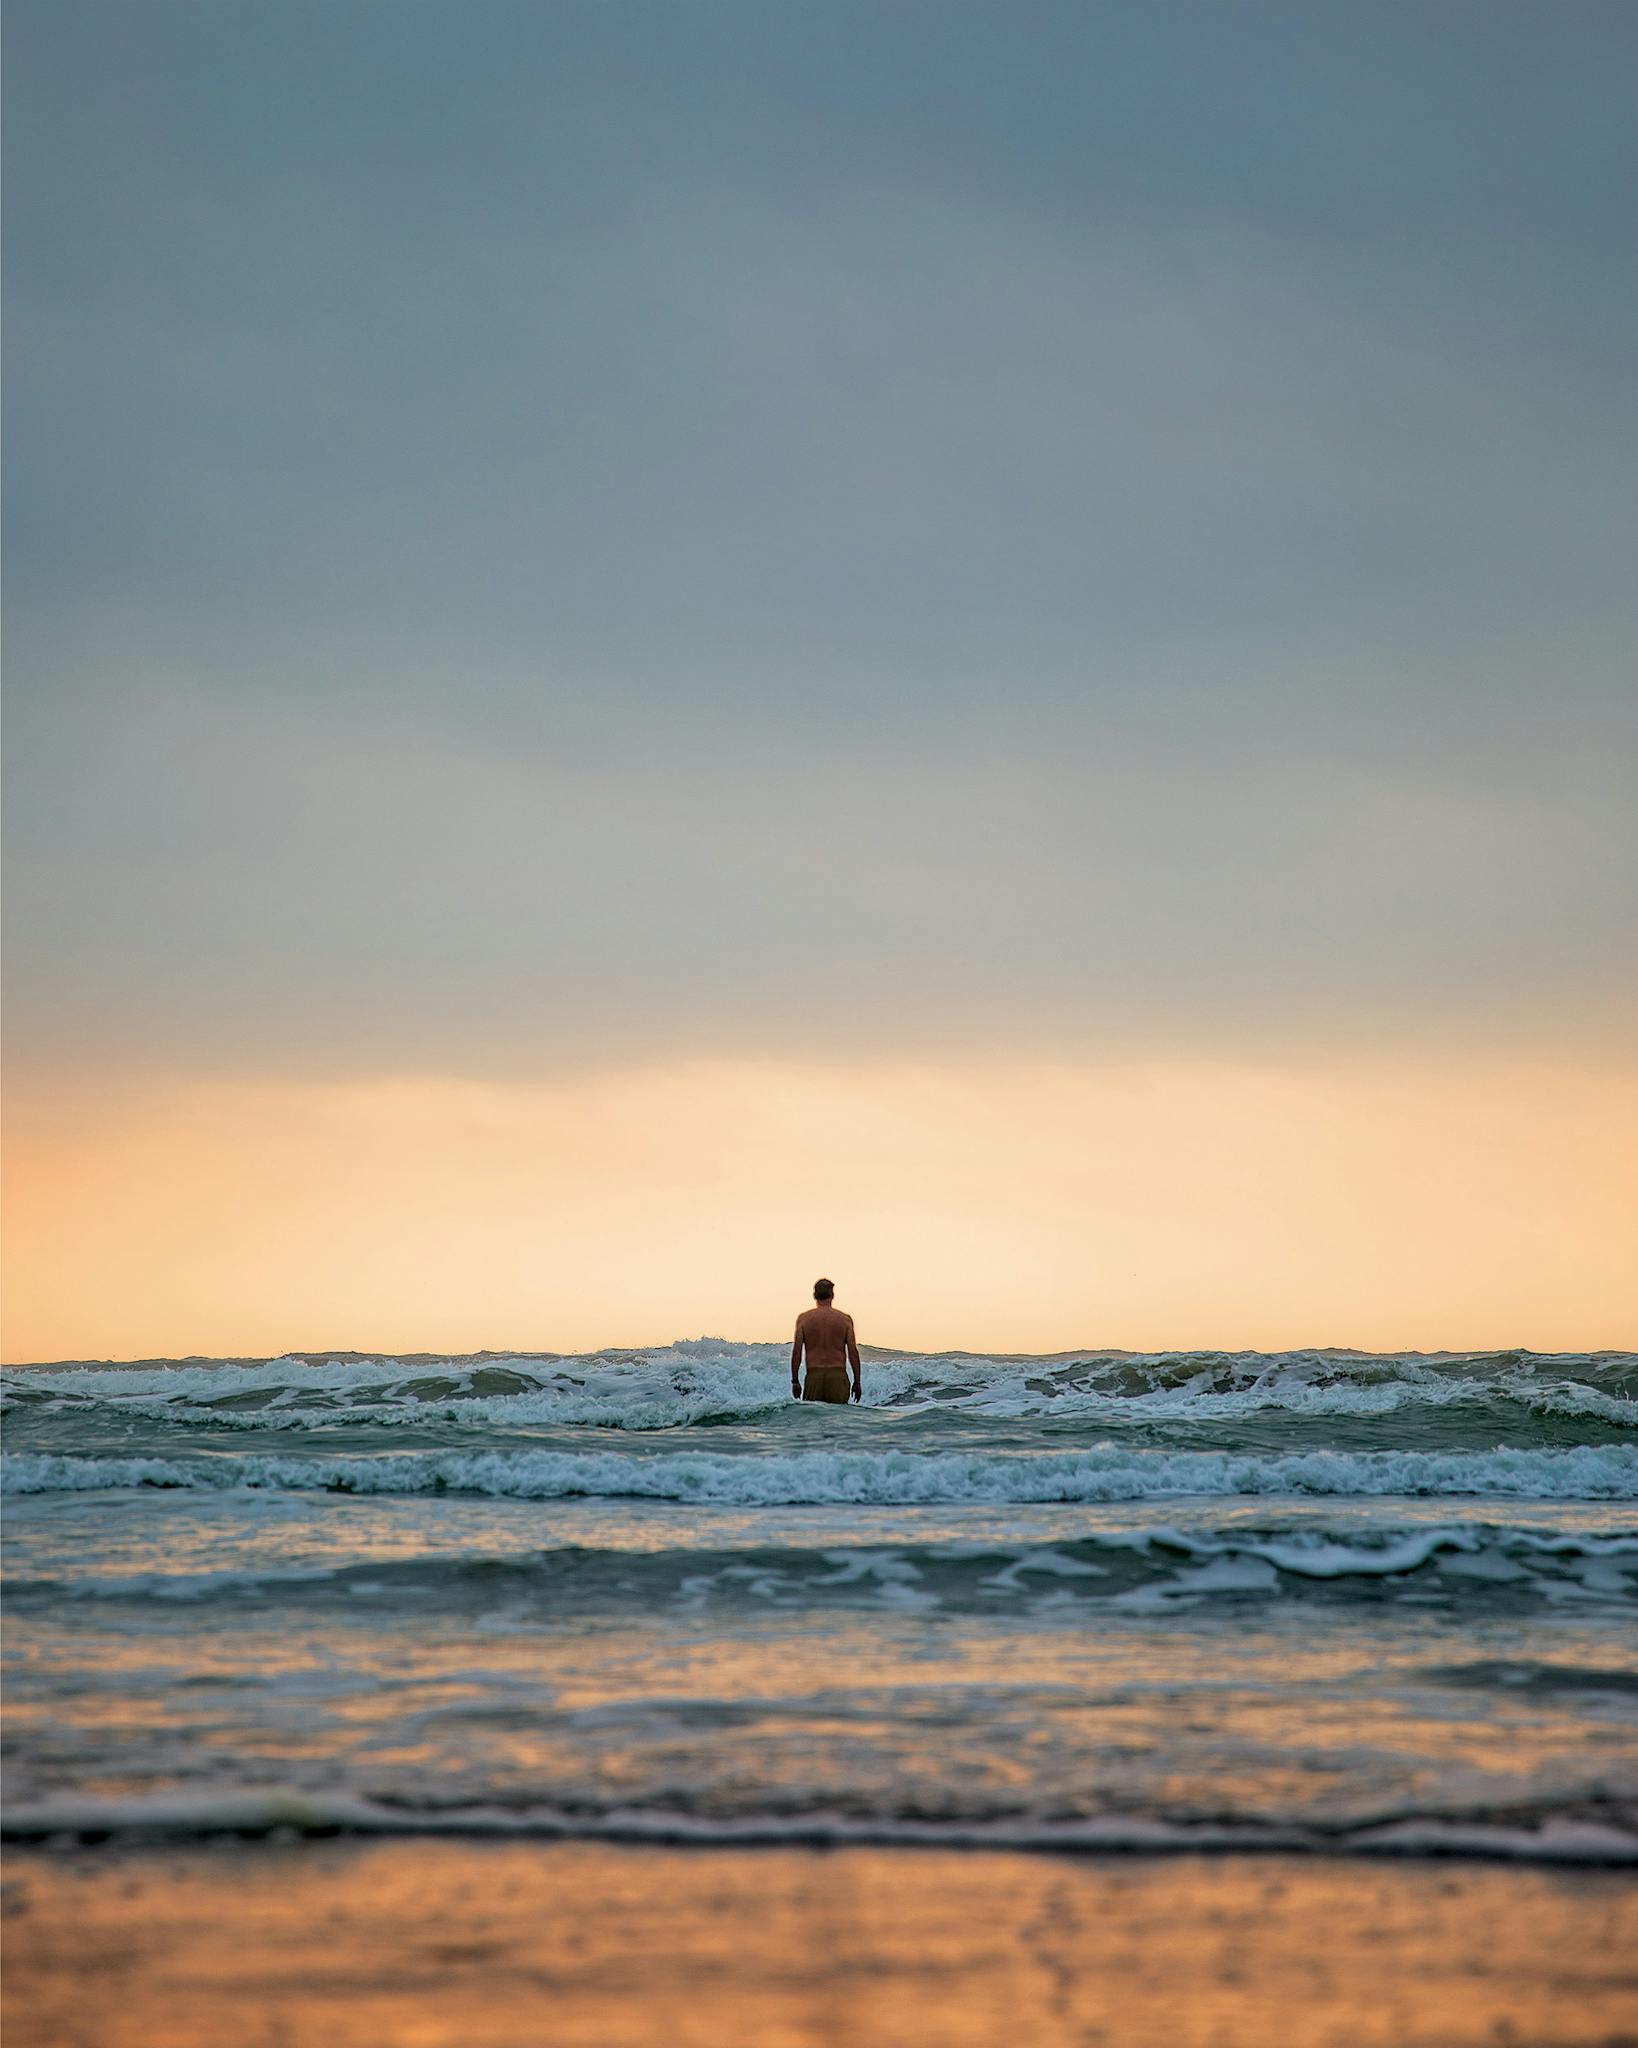 Writer David Courtney takes an early morning dip around mile marker 20 on Padre Island National Seashore on March 24, 2020.